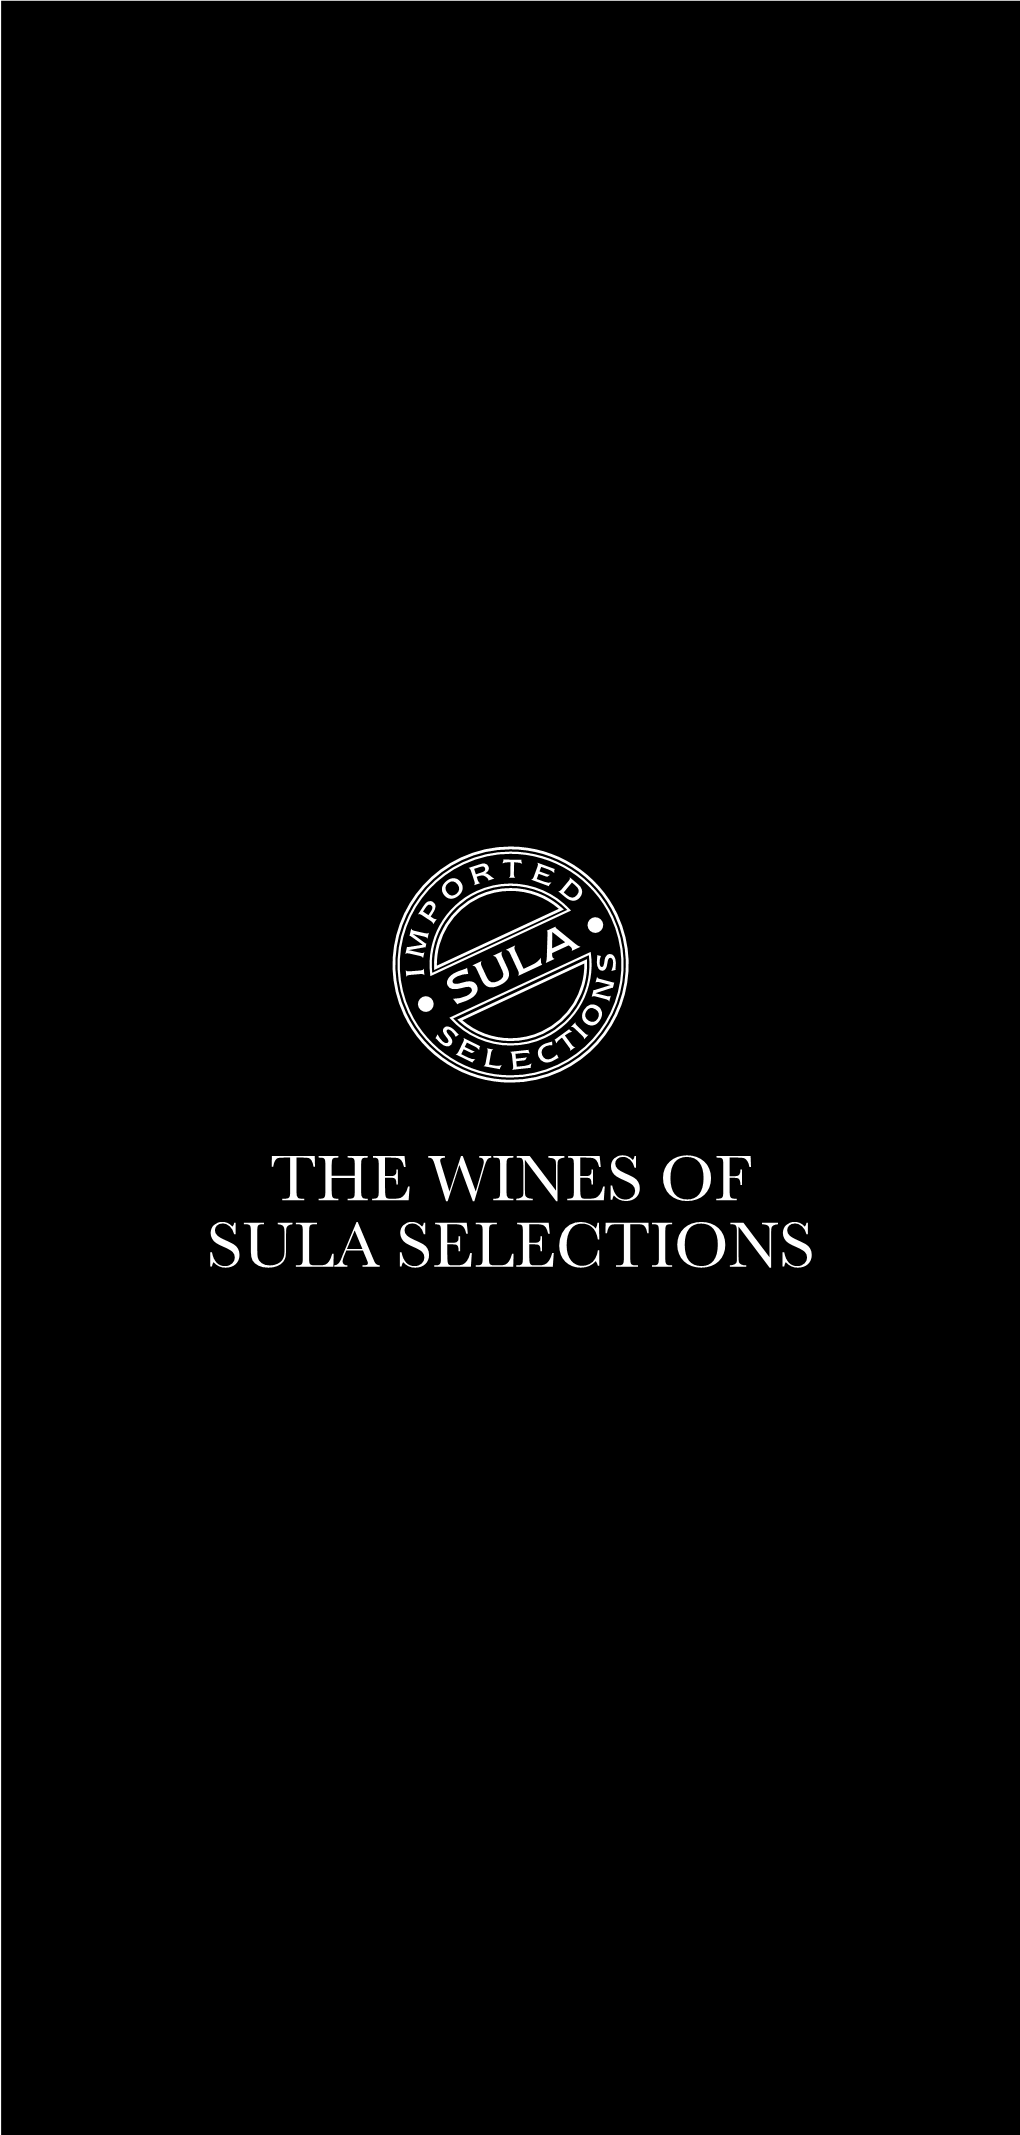 THE WINES of SULA SELECTIONS Our Mission at Sula Selections Is to Carefully Curate, Select, and Bring the Best Global Wines to You